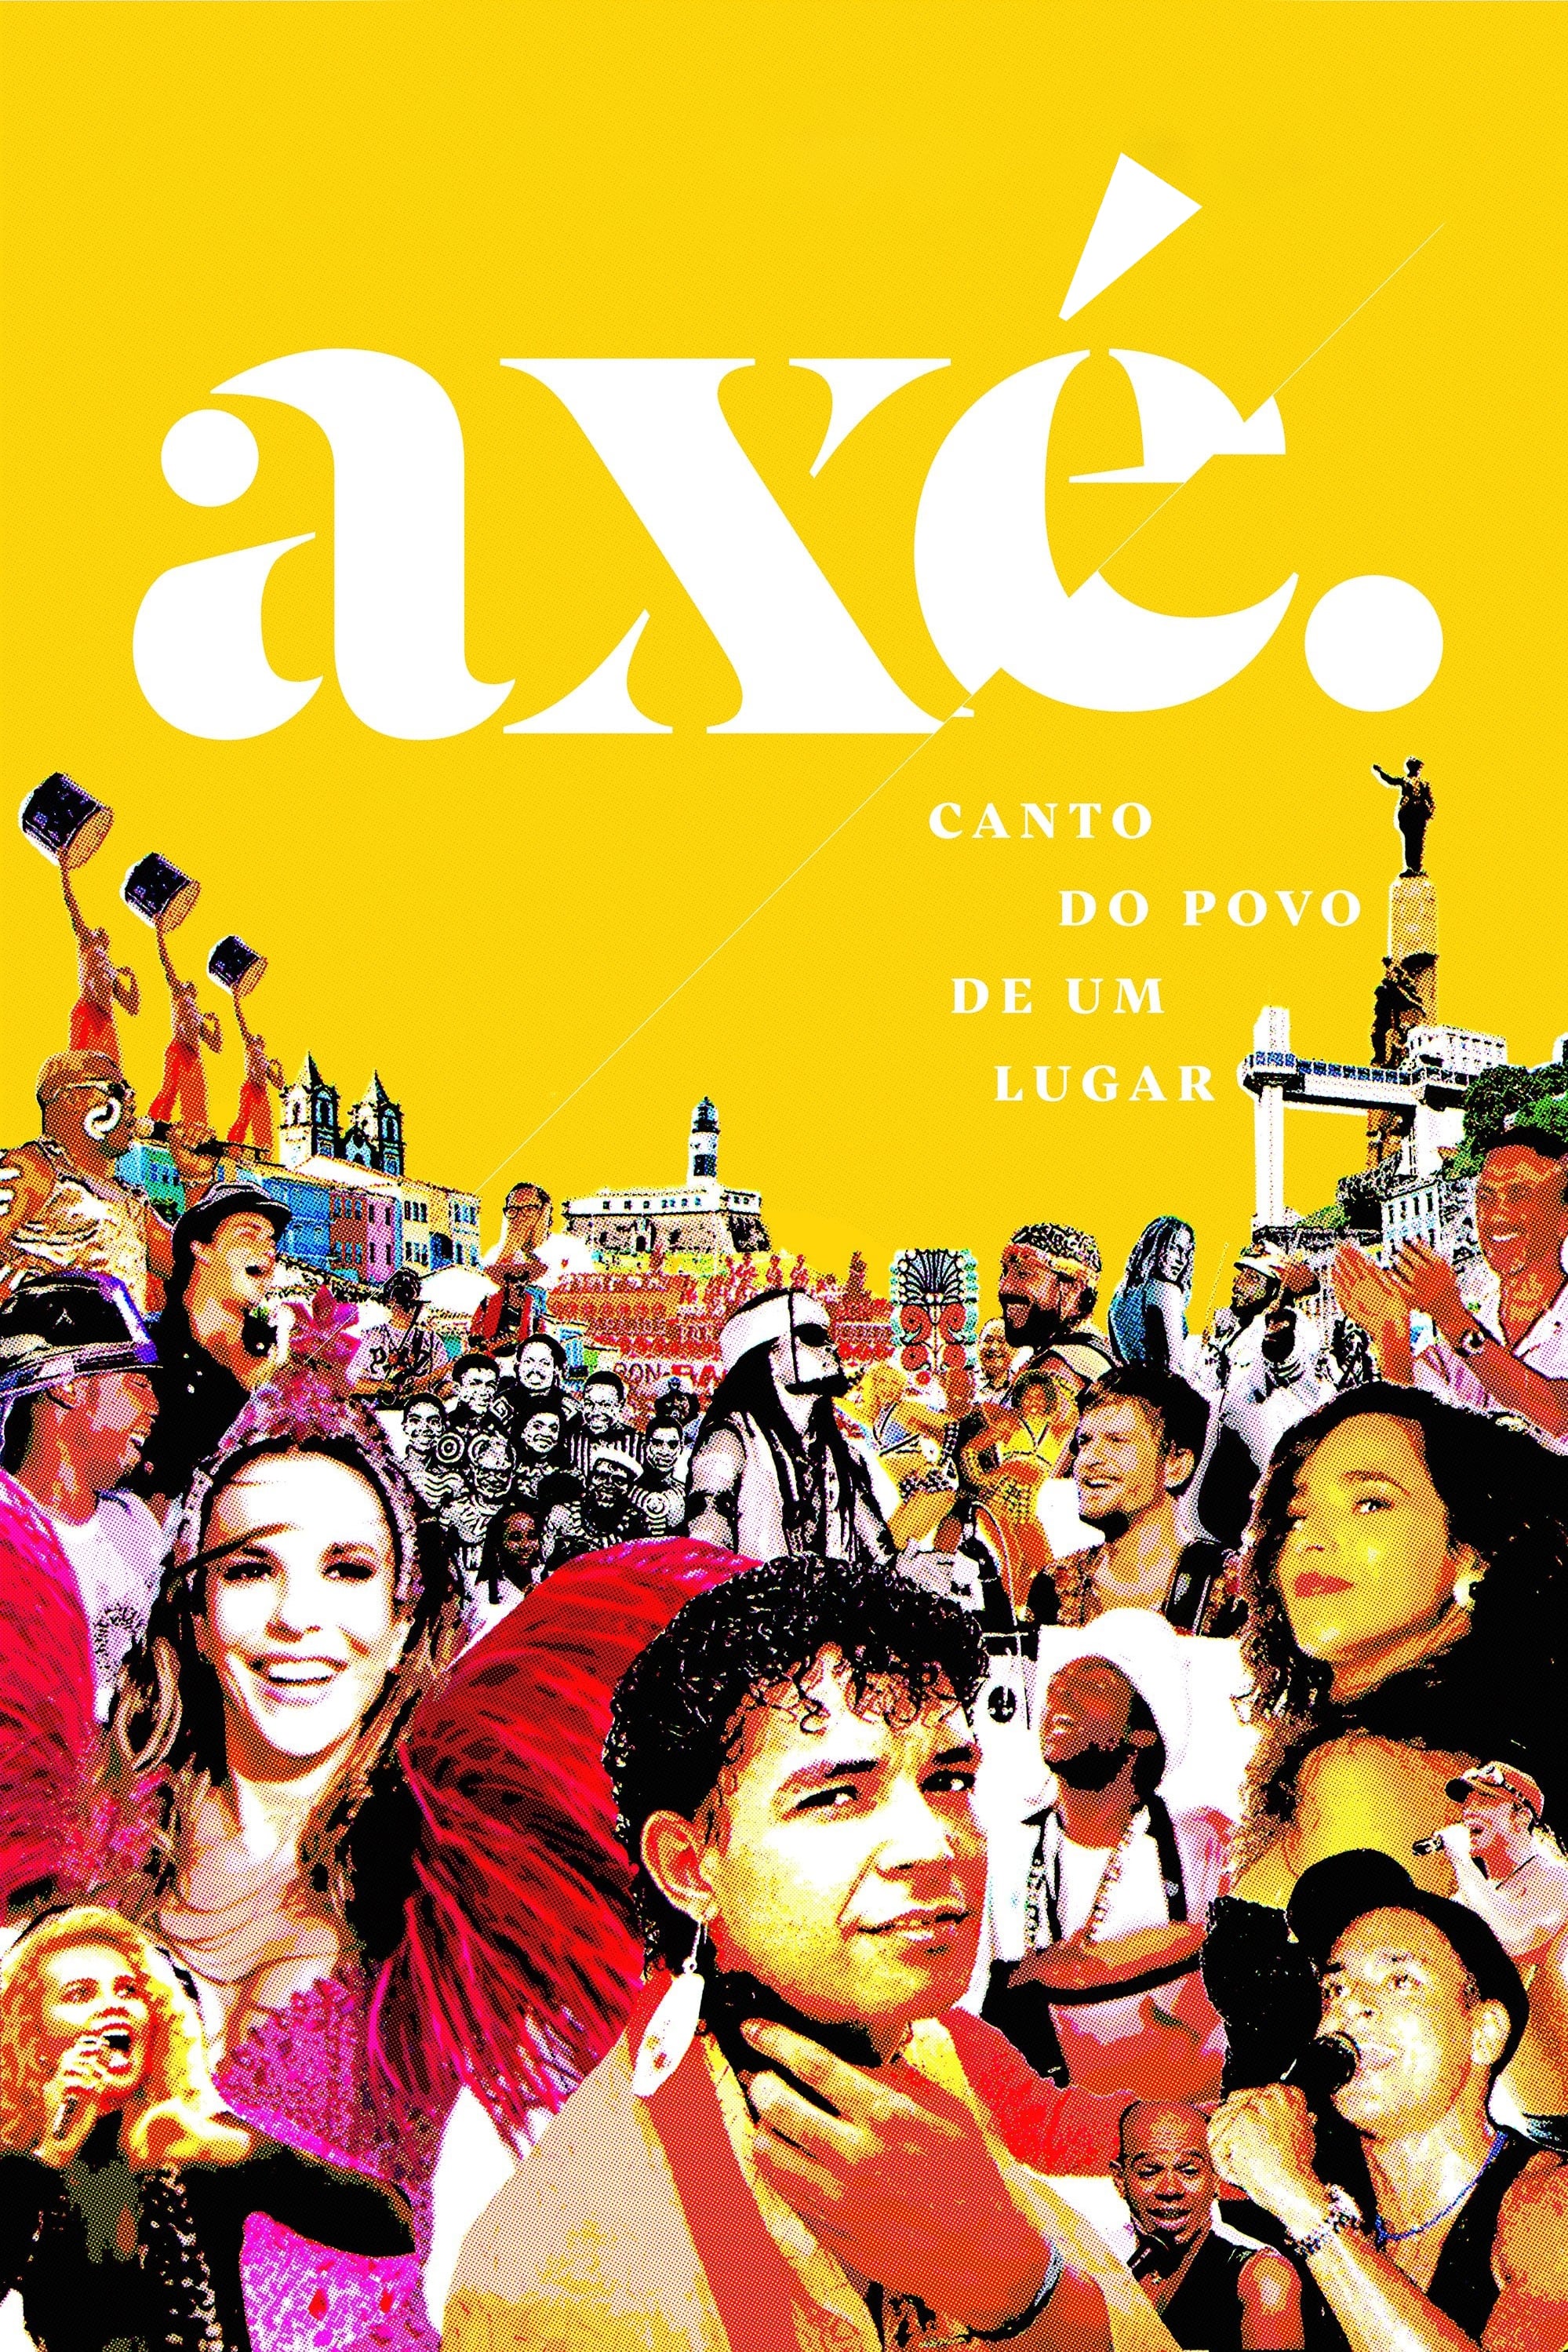 Axe: Music of a People